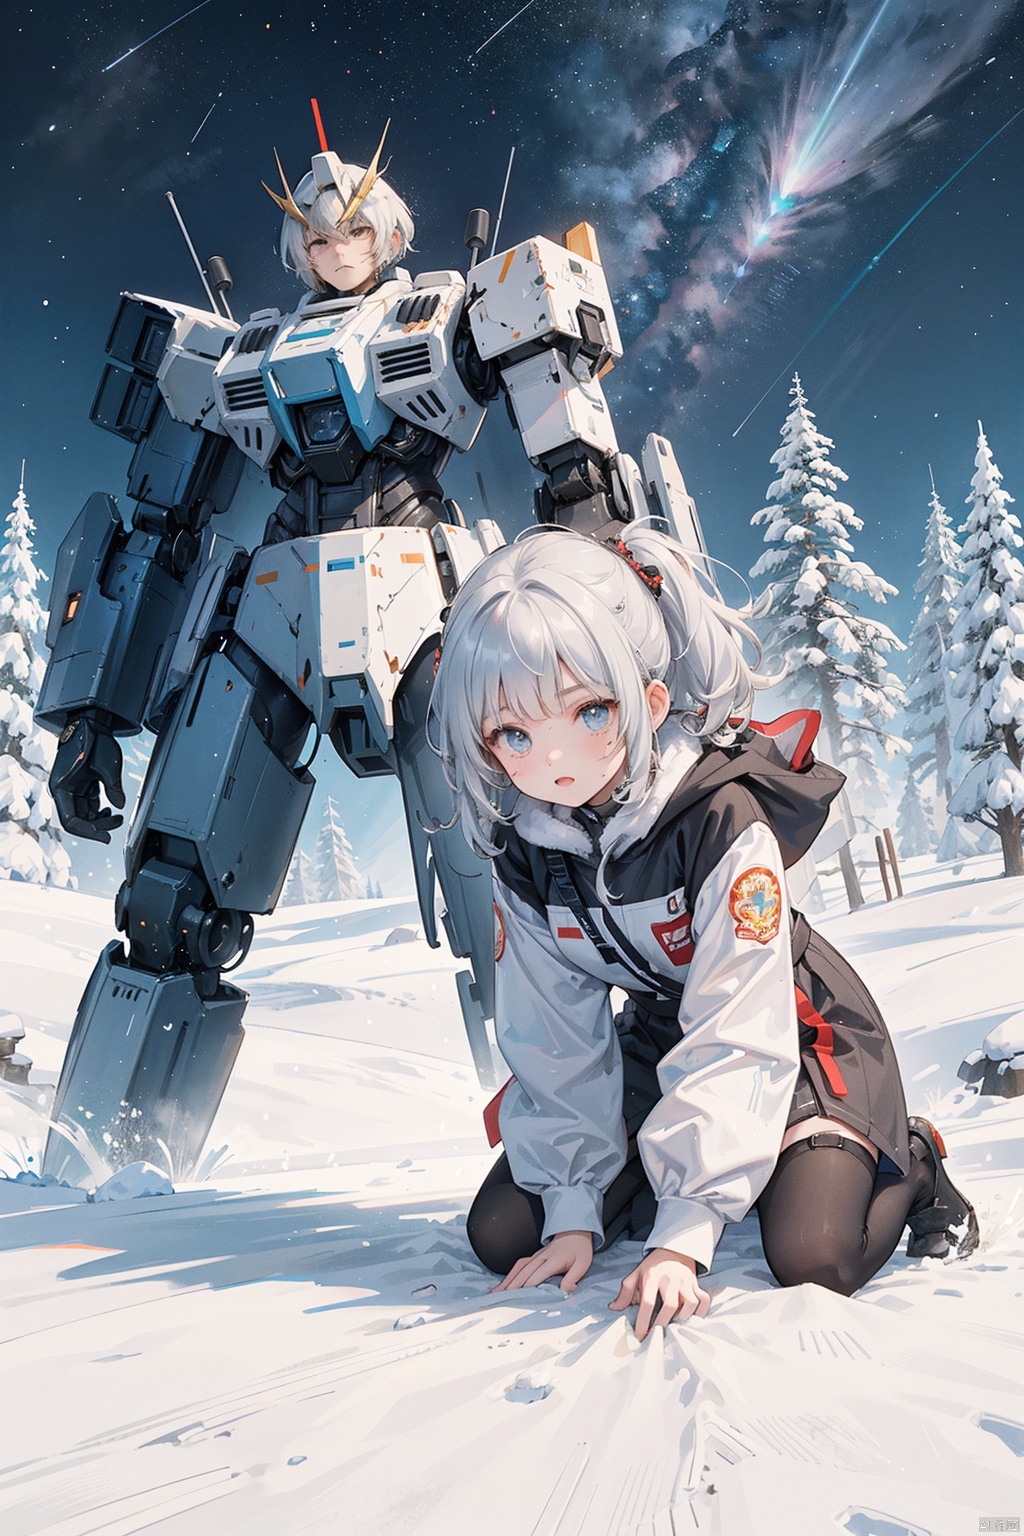 (A girl and a boy in the middle, with a giant mecha behind them, typesetting) (Snow Mountain) Spectacular, Cosmic, Combat, Mission, Belief, Peace, Ruins, Battle Damage, mecha destroyed, mecha shattered and incomplete, boy with injuries, Brave, Fighting